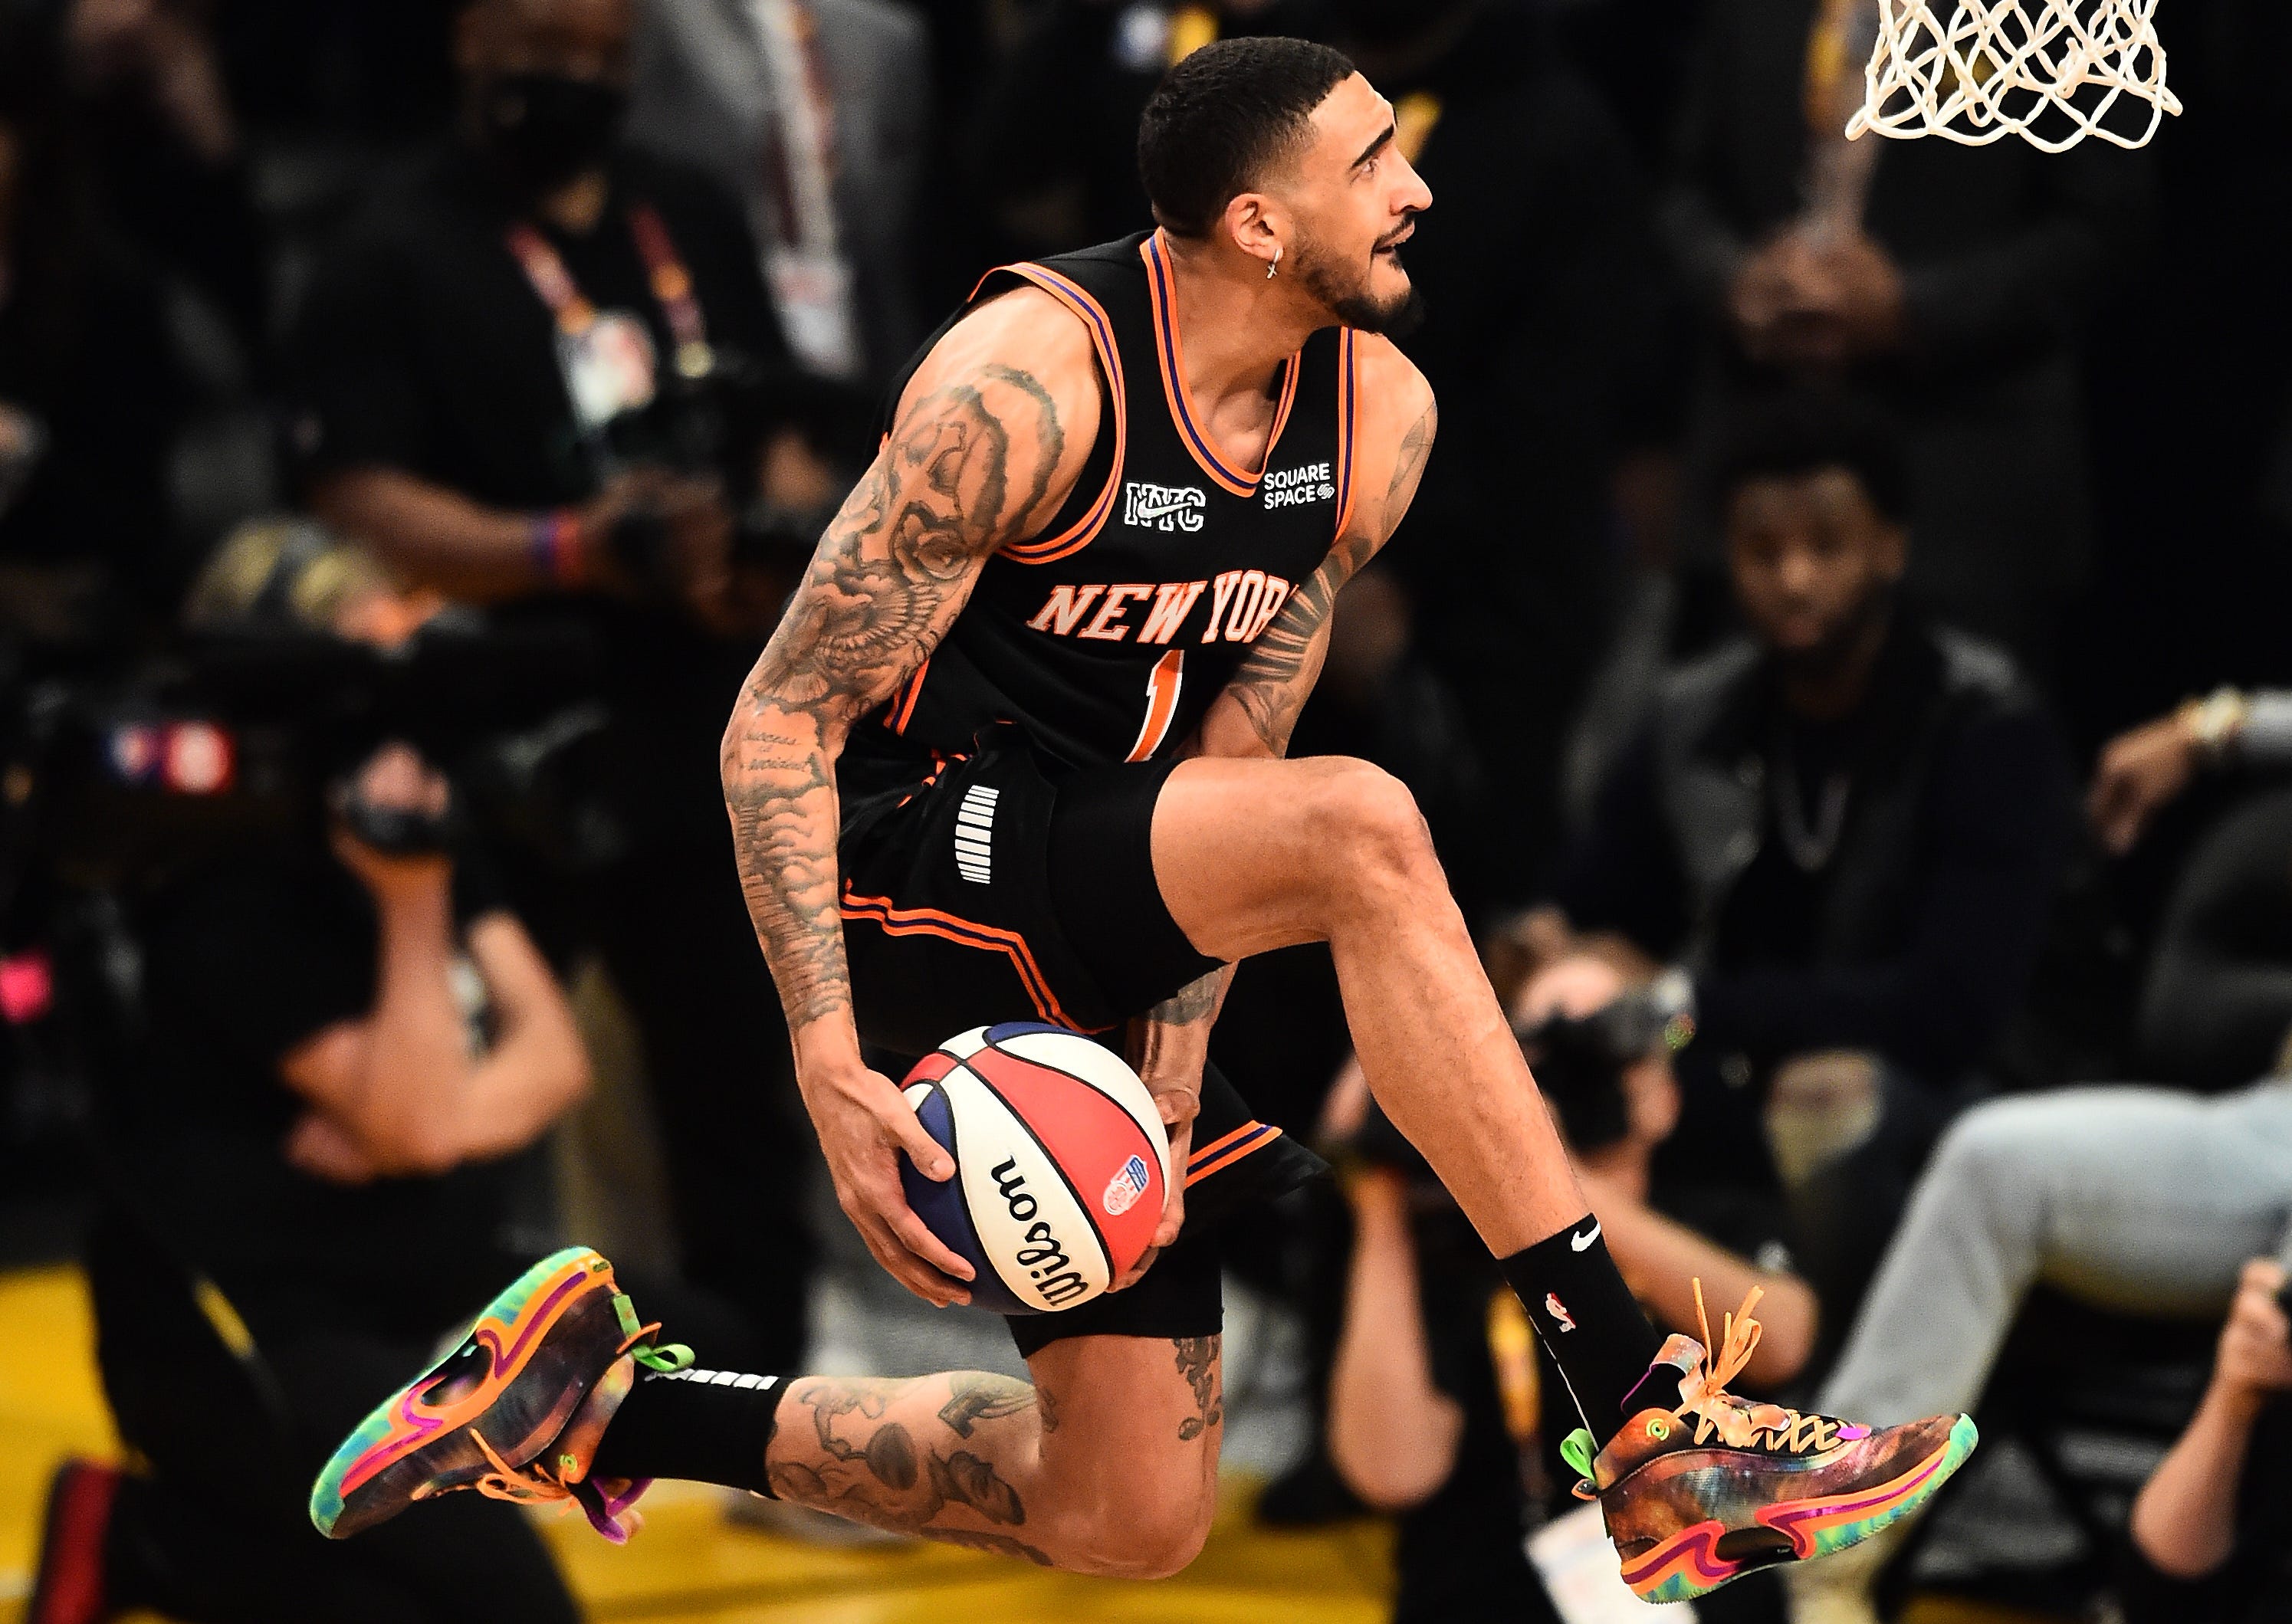 NBA Slam Dunk Contest: Who's in it, when is it and what's format?